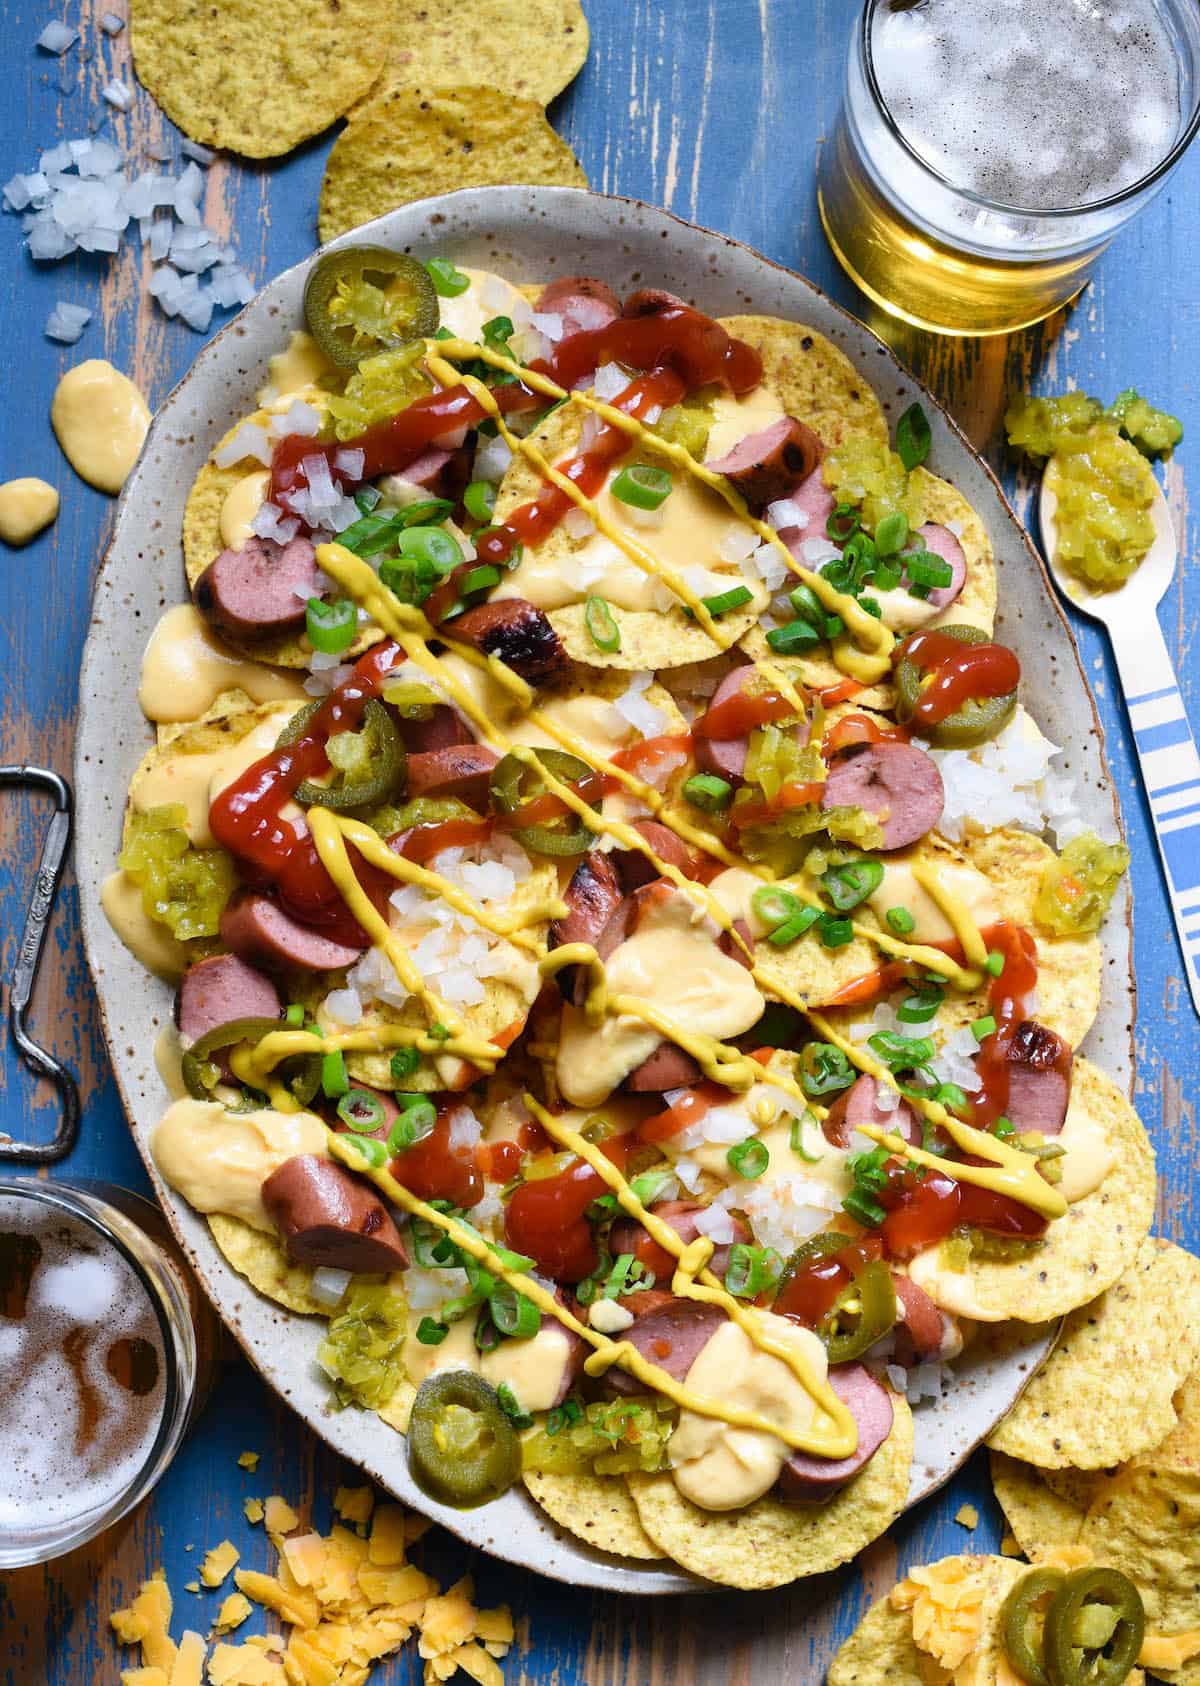 Celebrate baseball season with Hot Dog Nachos, a mashup of two ballpark foods! Includes recipe for homemade beer queso sauce. | foxeslovelemons.com